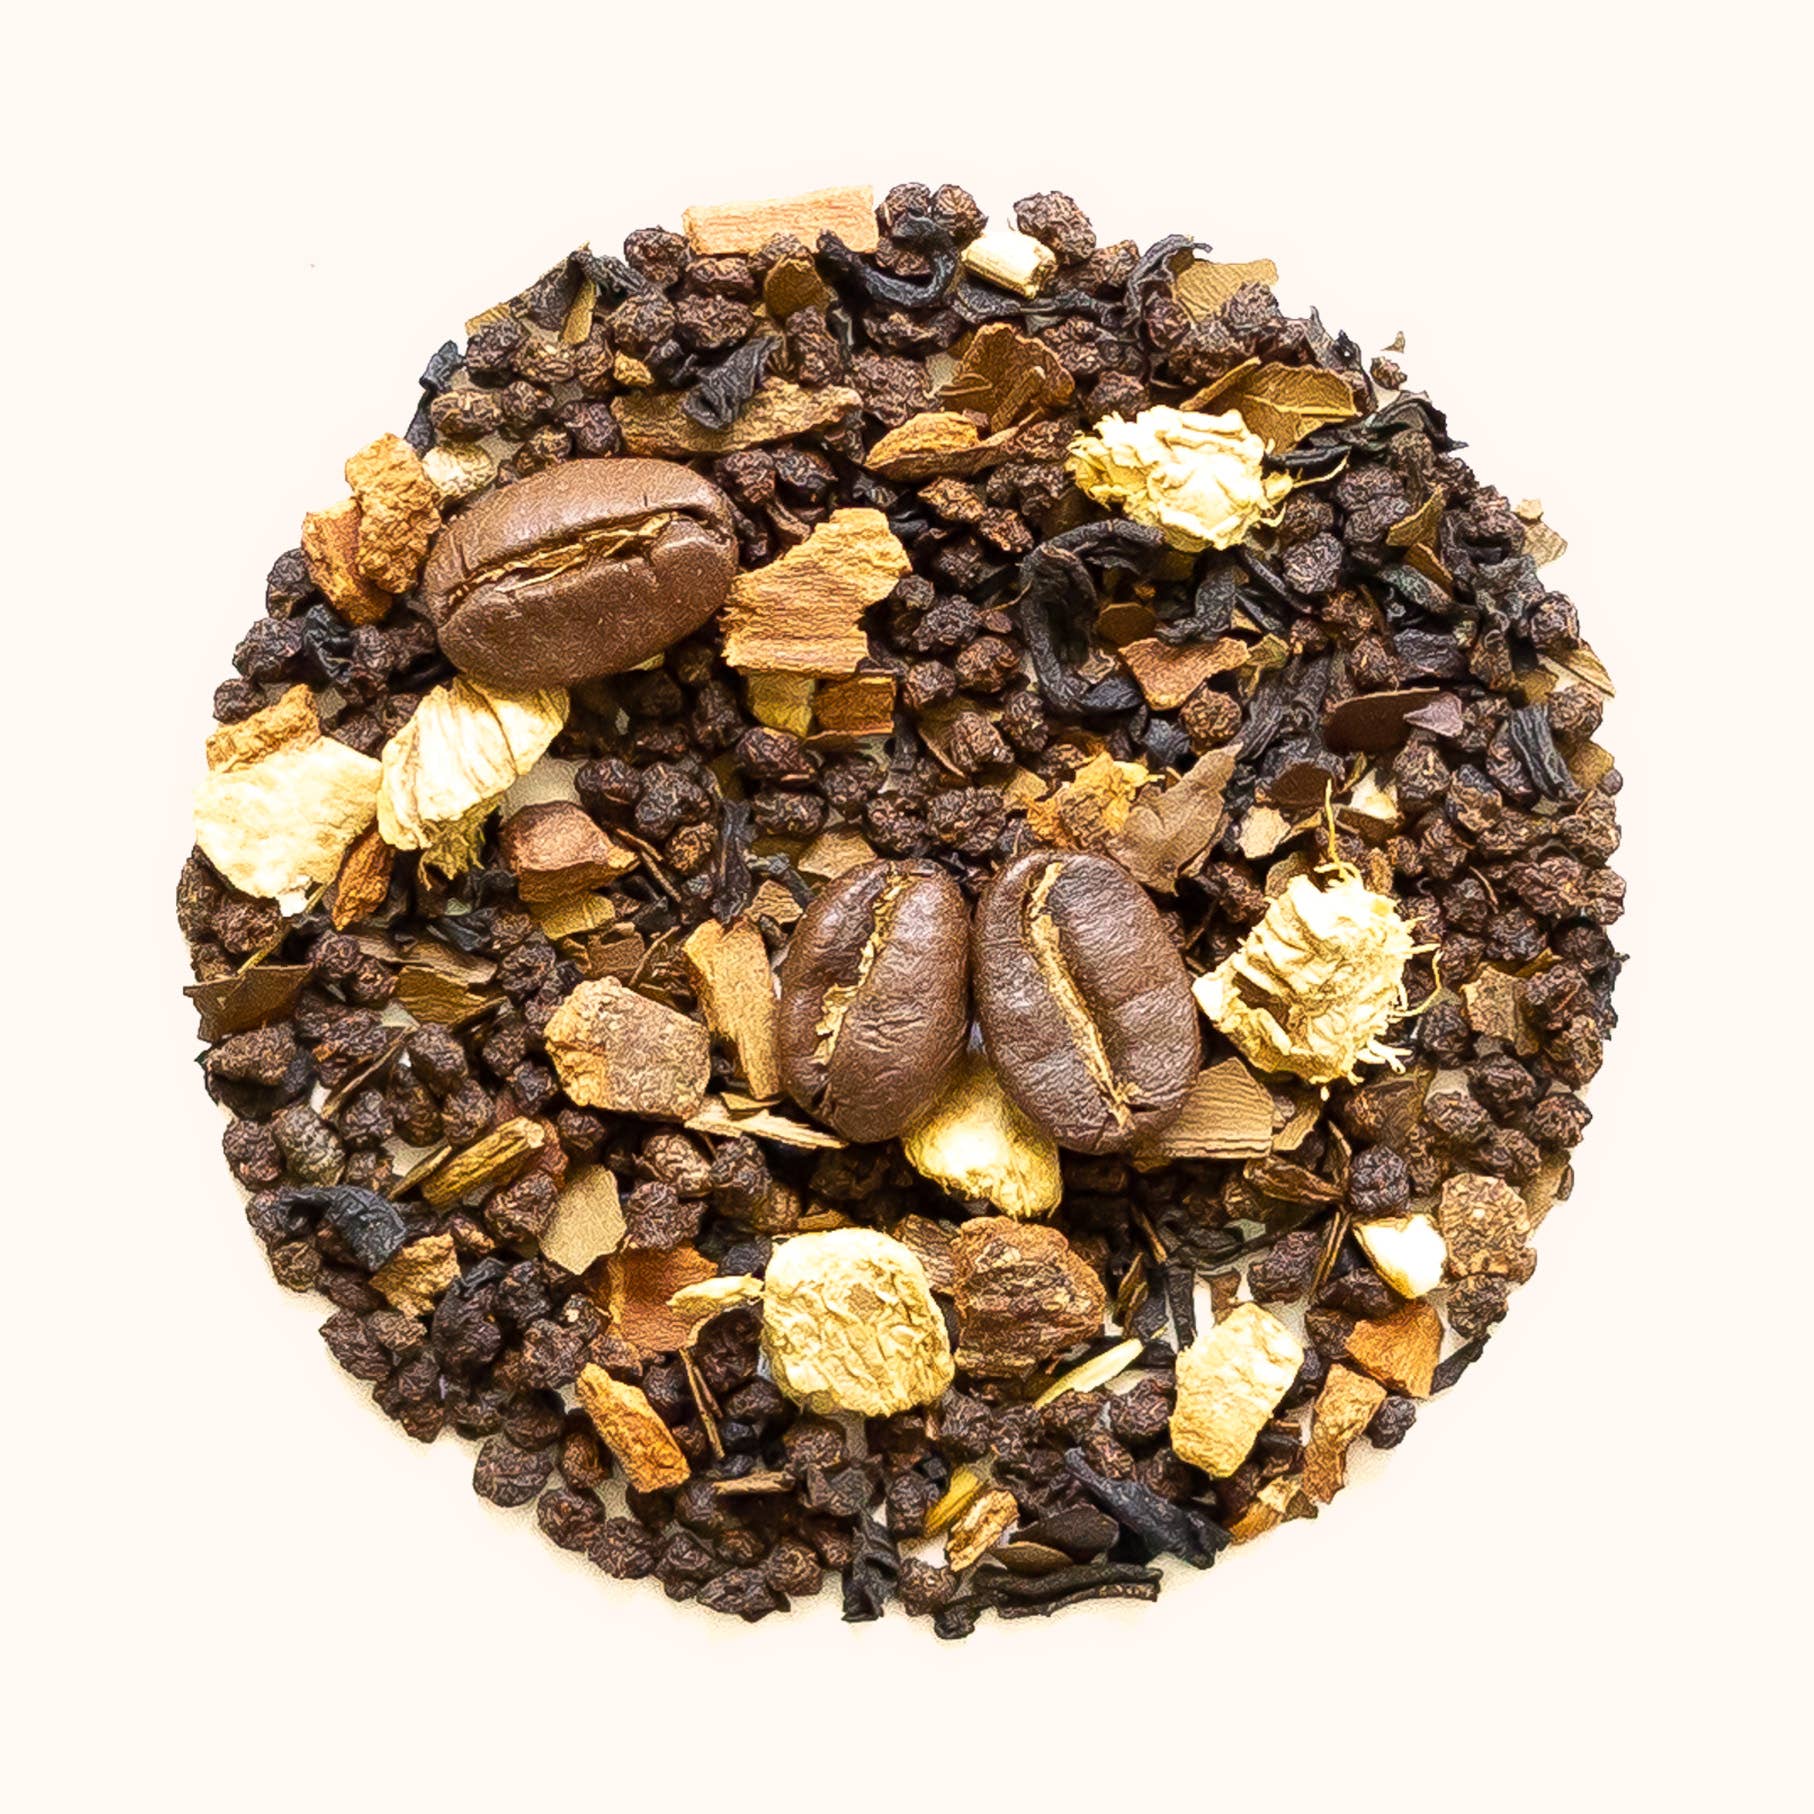 Dirty Chai loose leaf tea sample by August Uncommon